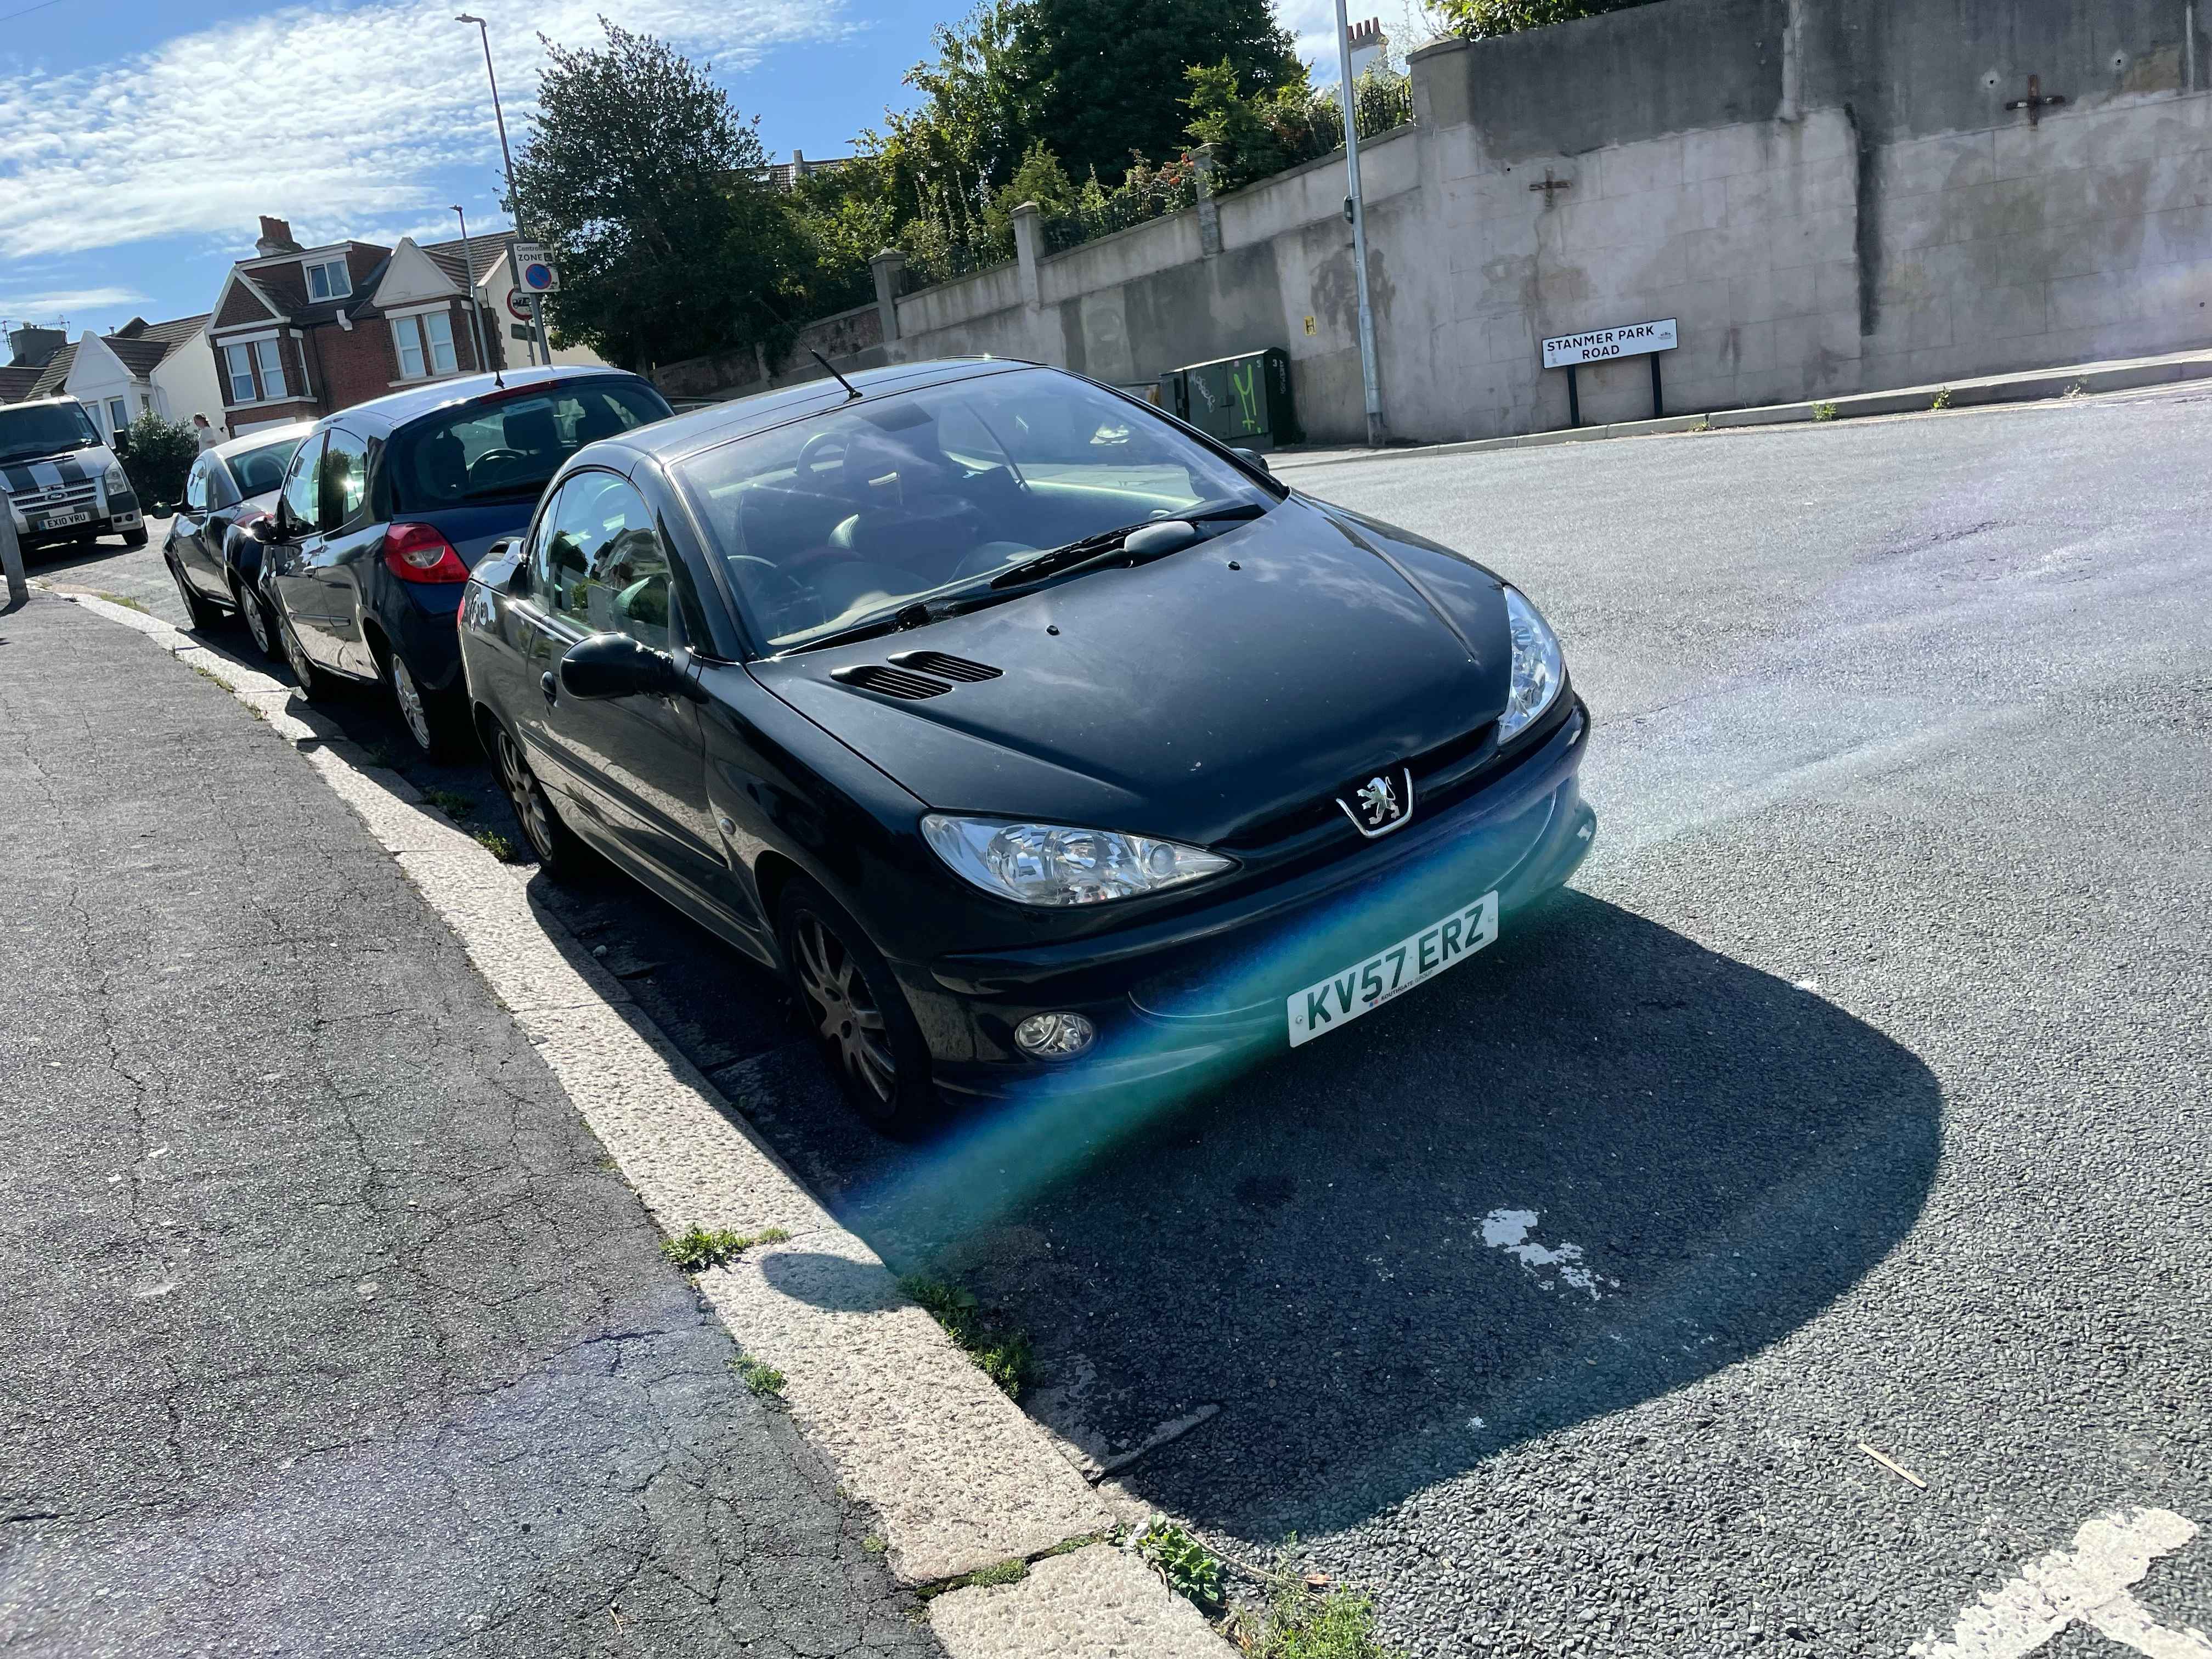 Photograph of KV57 ERZ - a Black Peugeot 206 parked in Hollingdean by a non-resident. The fourth of eight photographs supplied by the residents of Hollingdean.